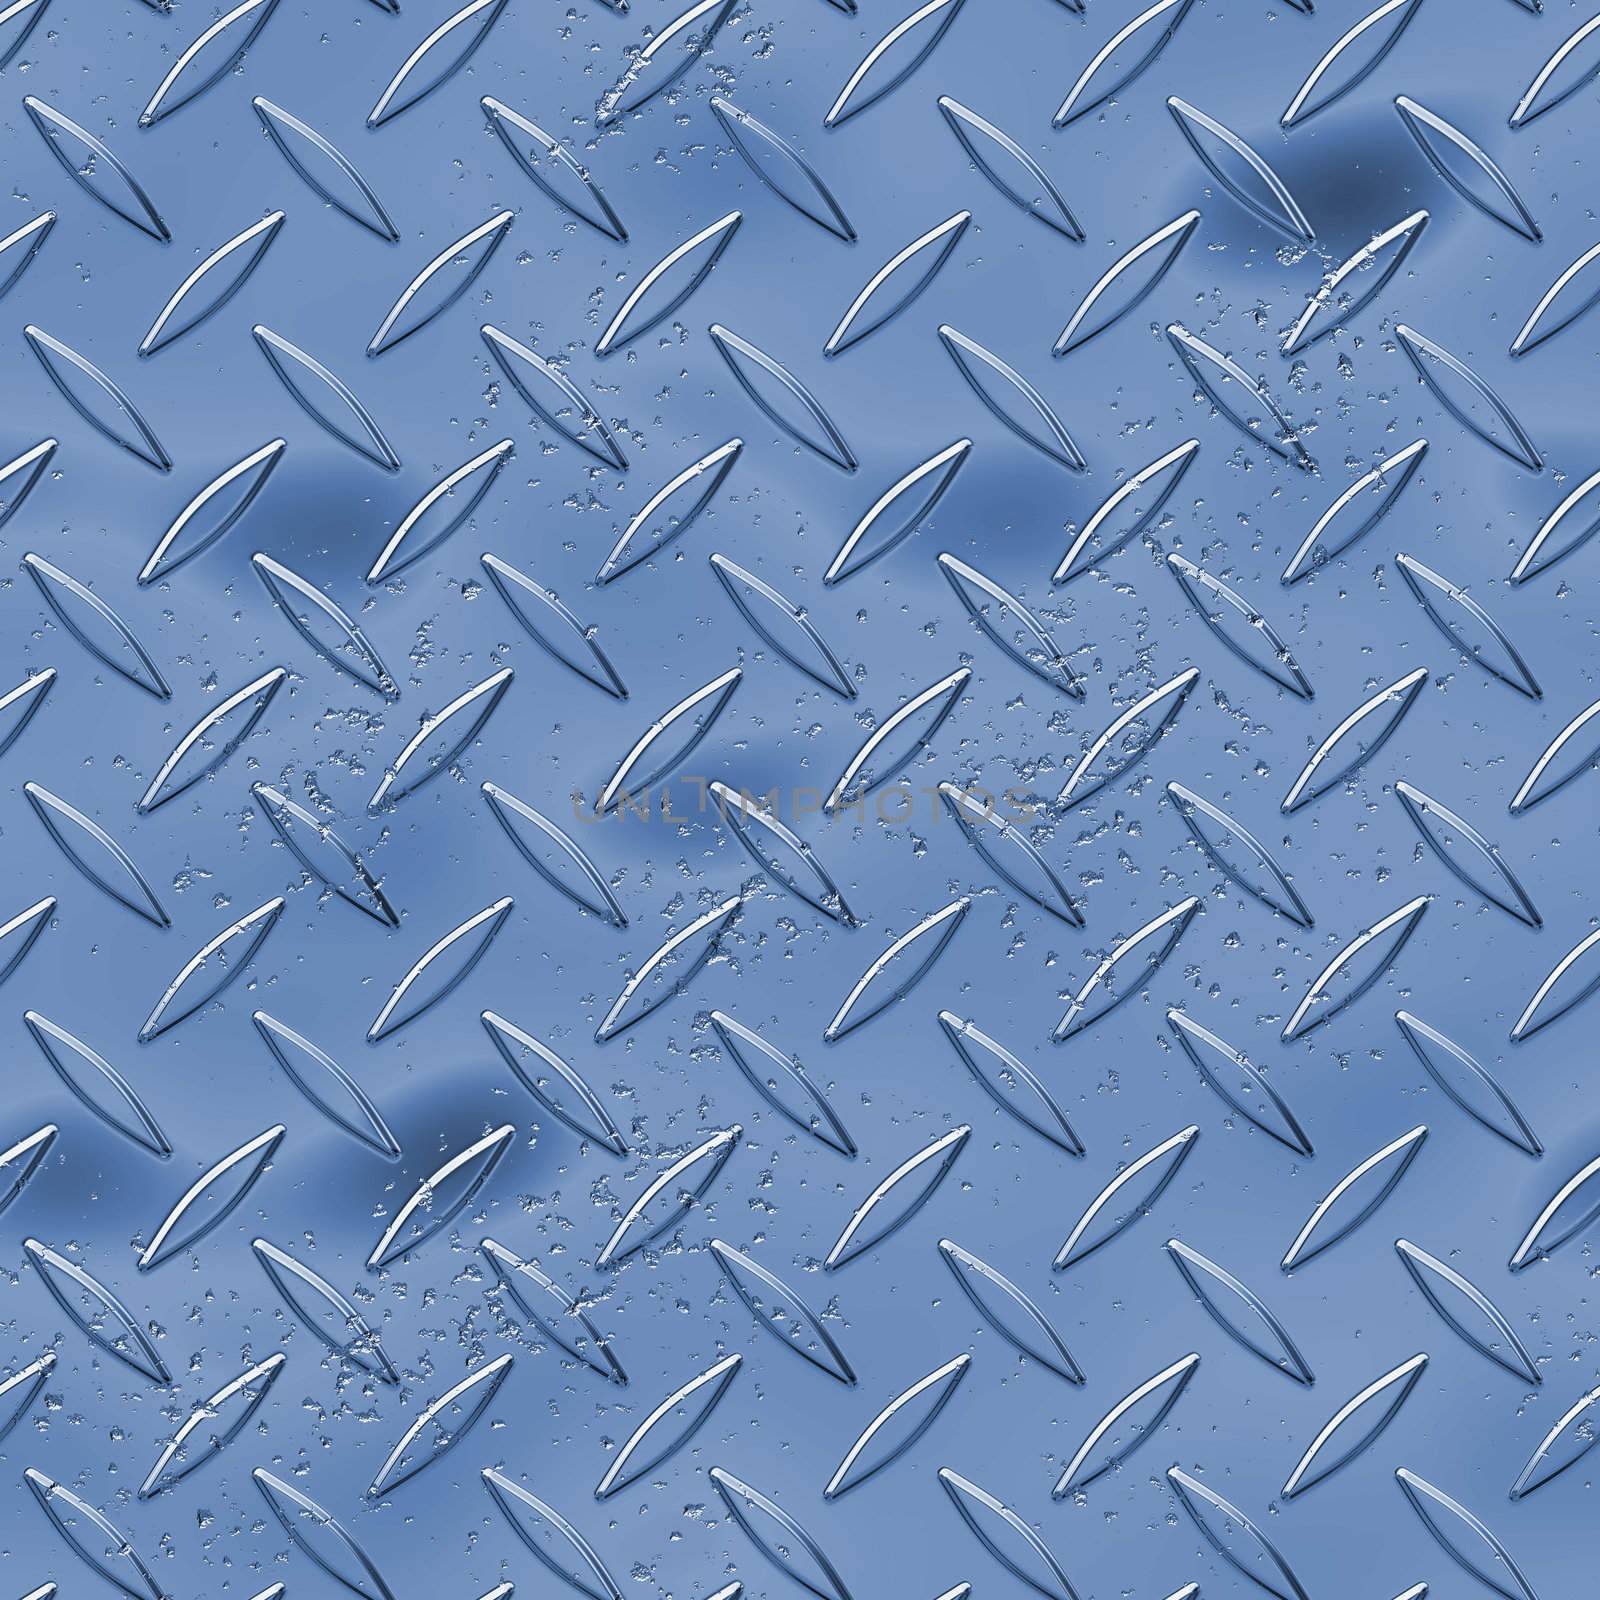 Diamond plate metal texture - a very nice background for an industrial or contruction type look.  Fully tileable - this tiles seamlessly as a pattern.